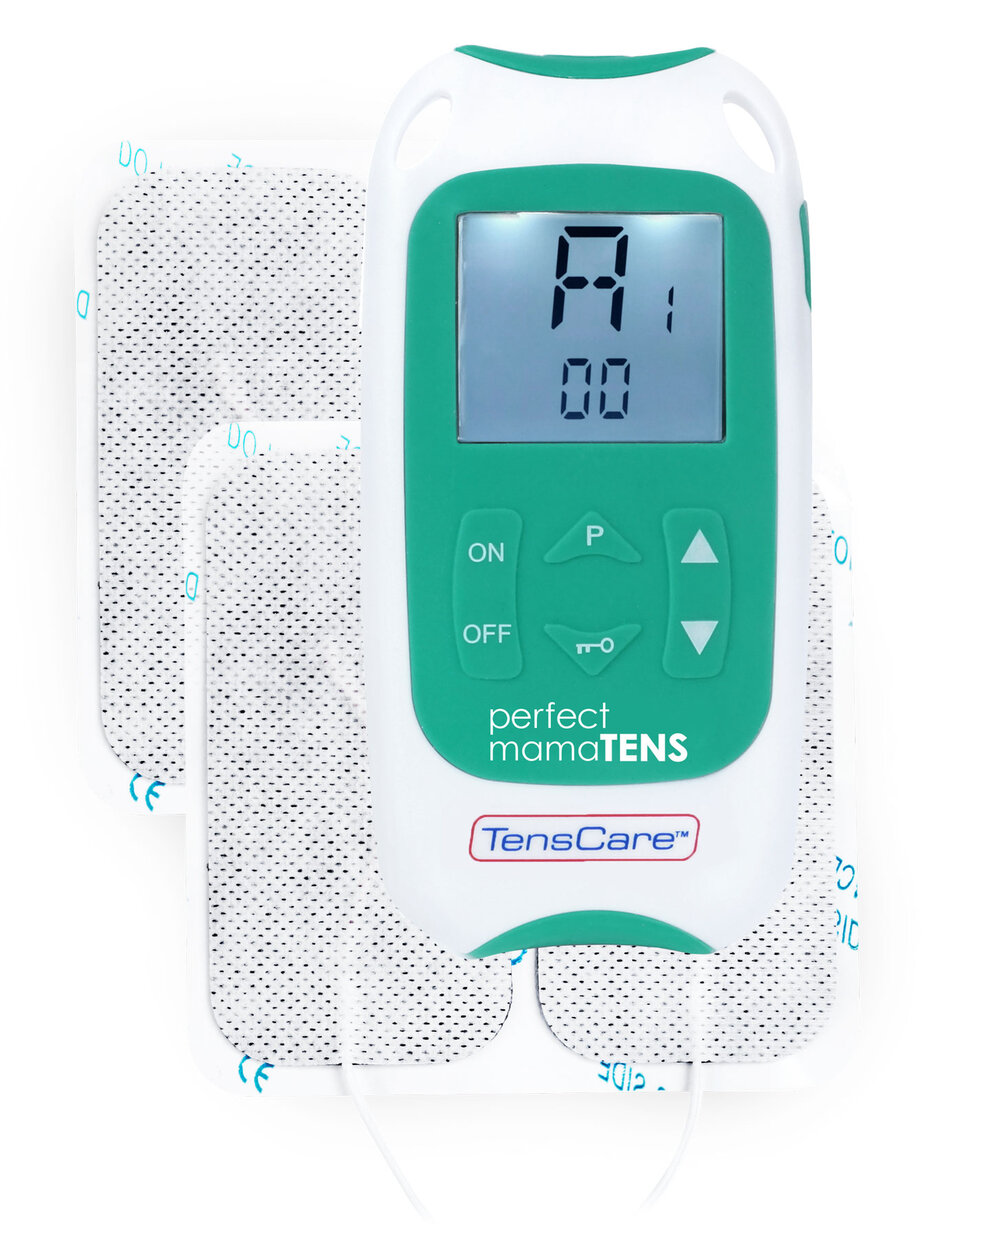 Using a TENS Unit During Labor